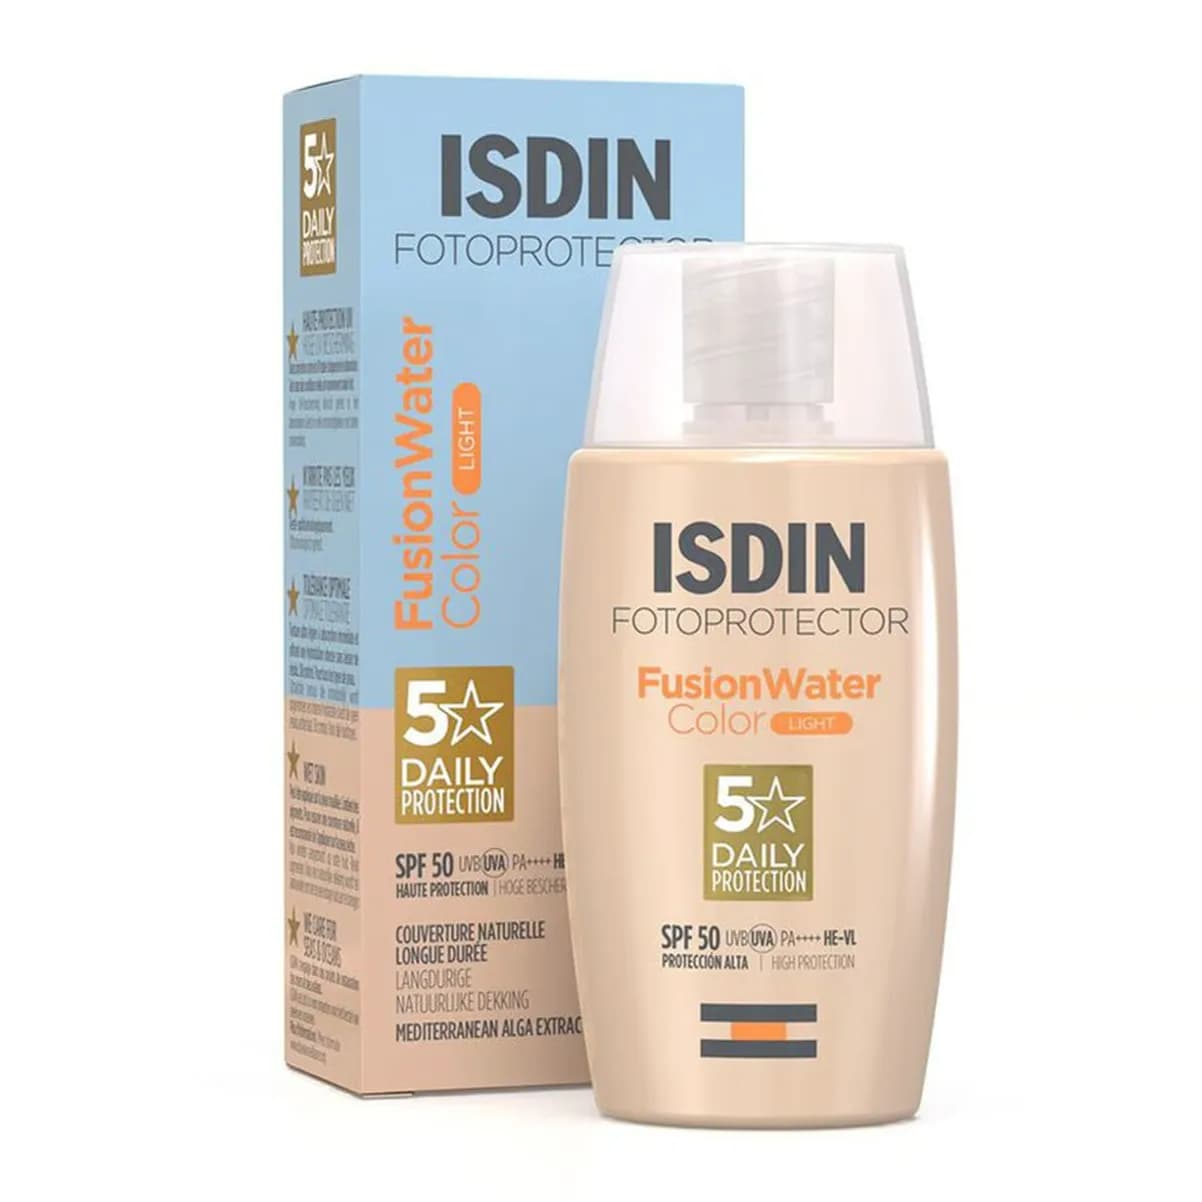 Isdin Fotoprotector Fusion Water Color Light Spf50